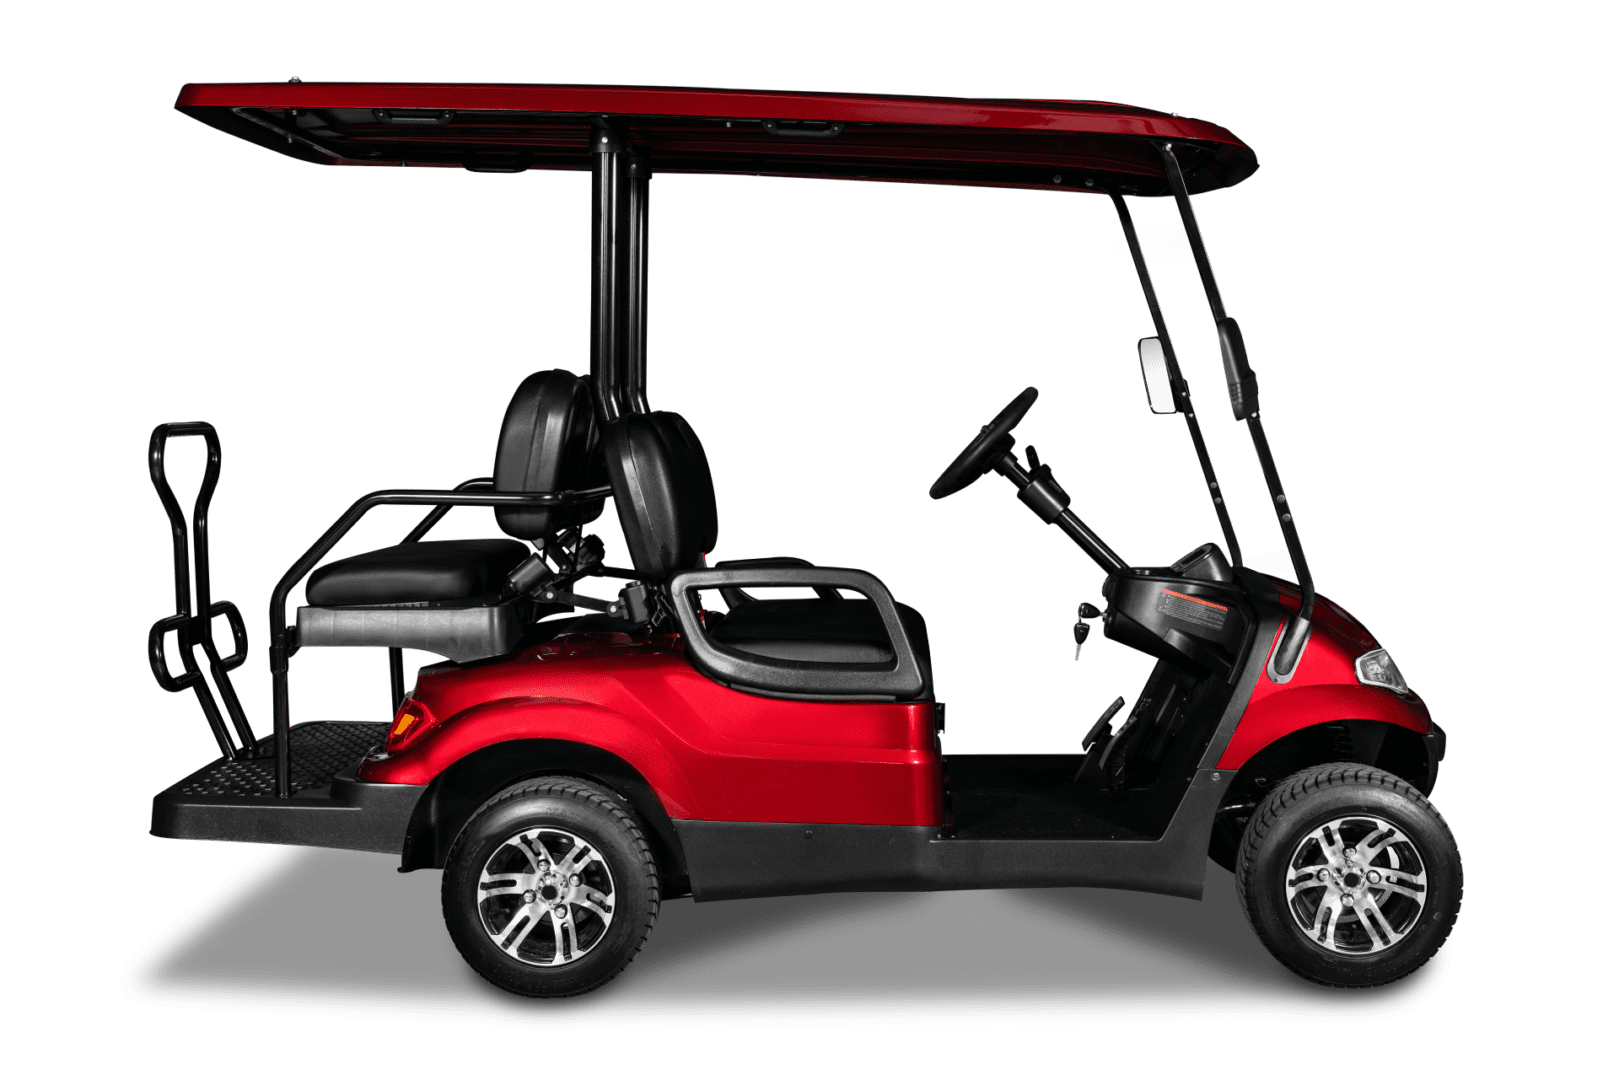 A red golf cart with a canopy on top.